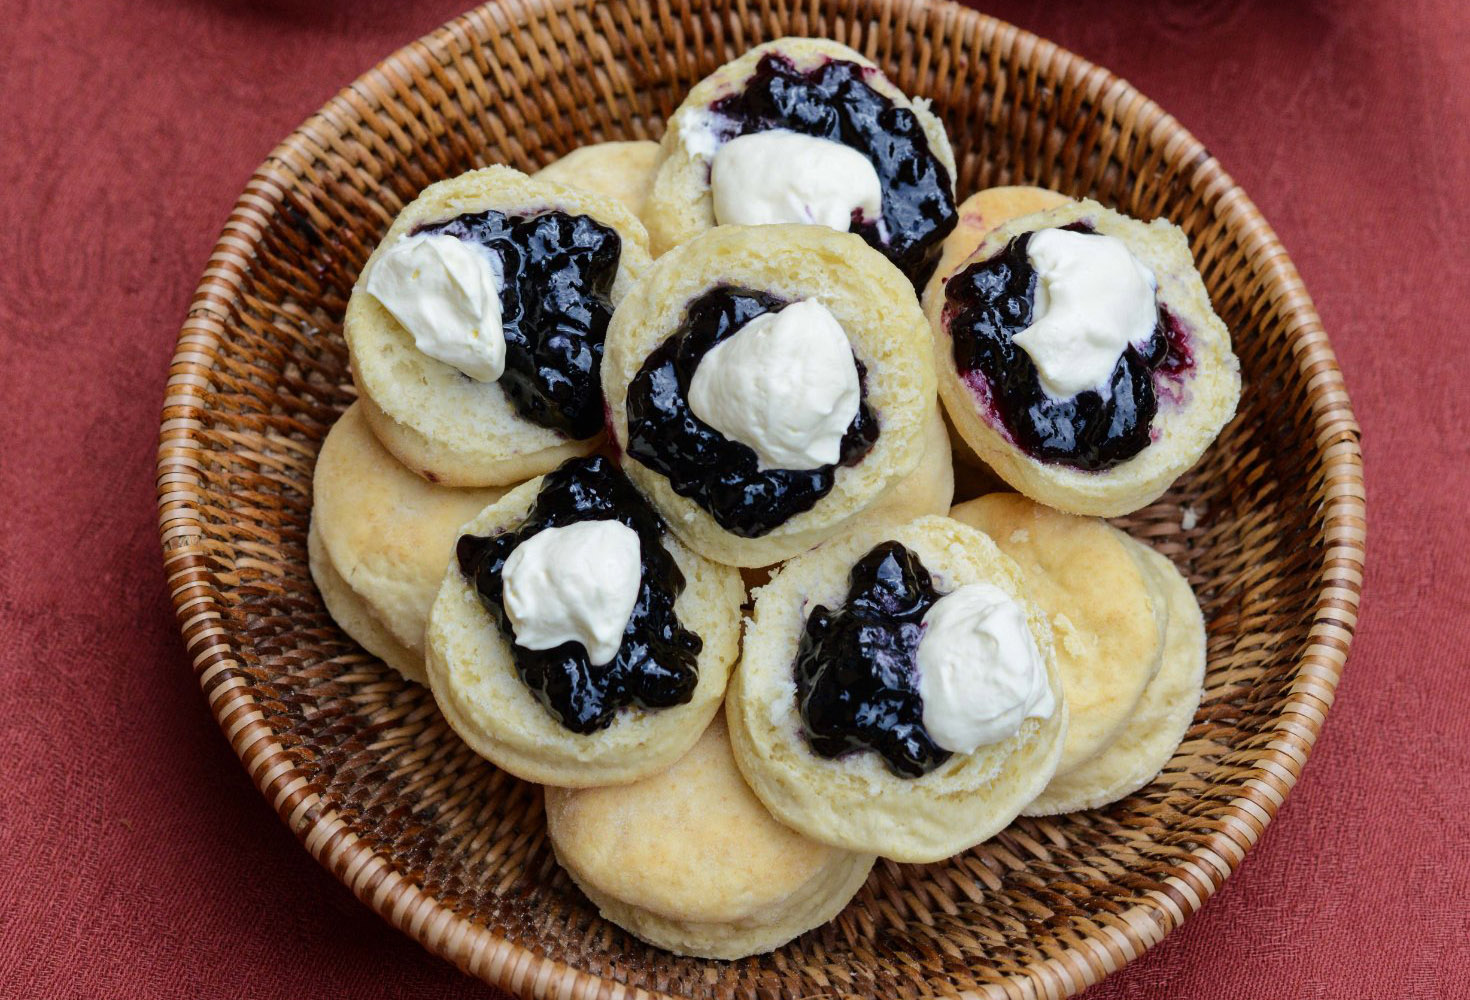 Scones with jam and cream in basket